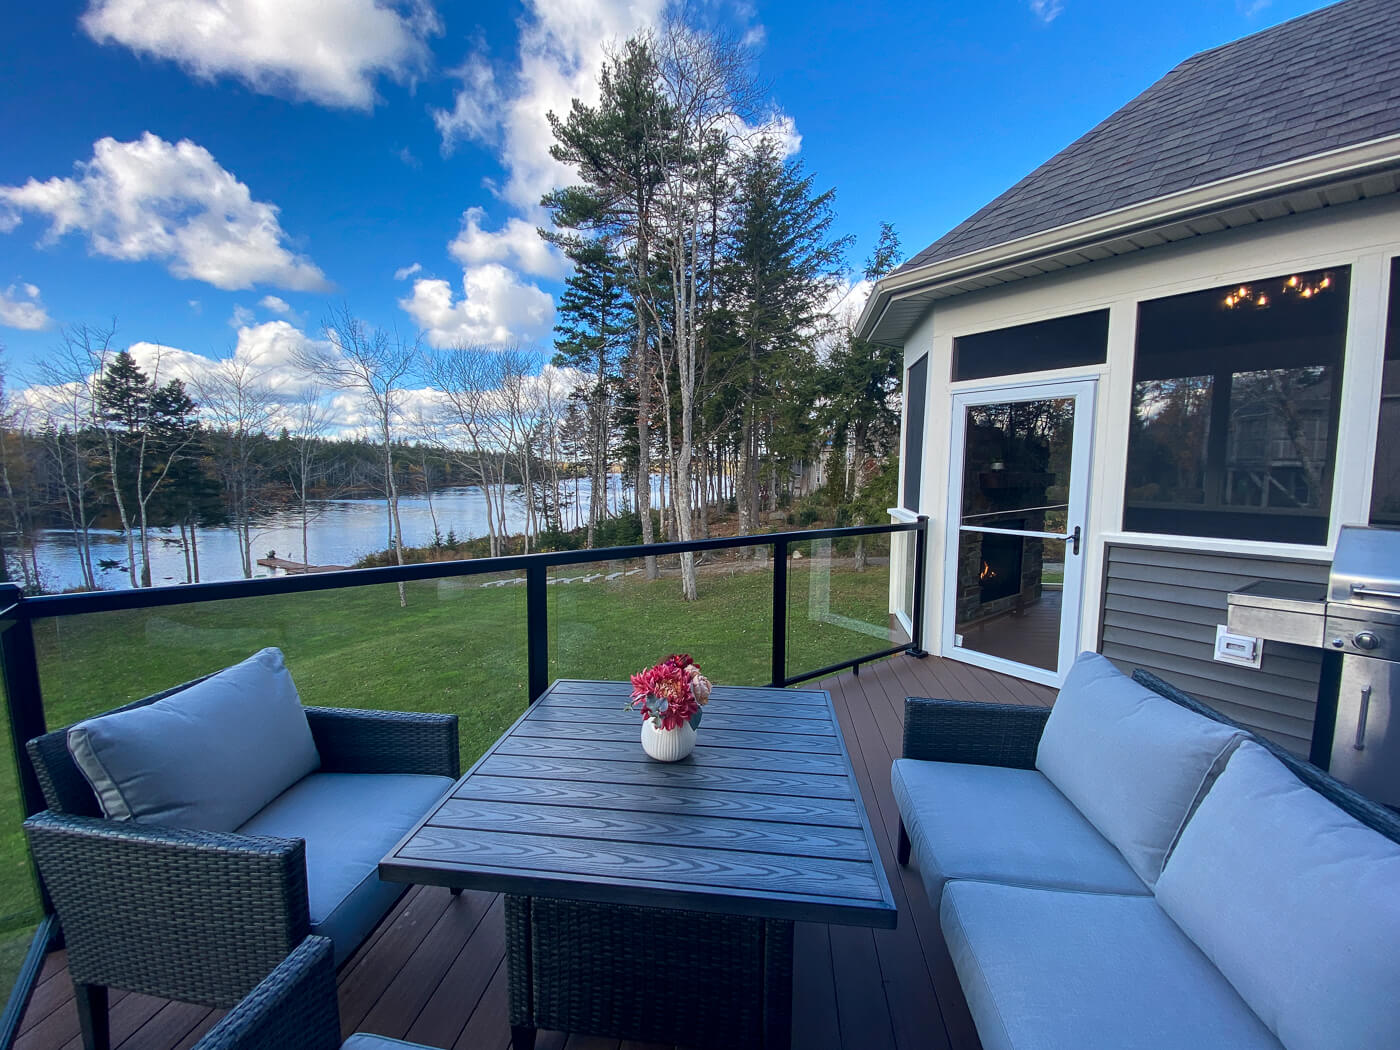 After photo of the adjacent deck, with patio furniture and center-table, looking out to the backyard and lake in Nova Scotia